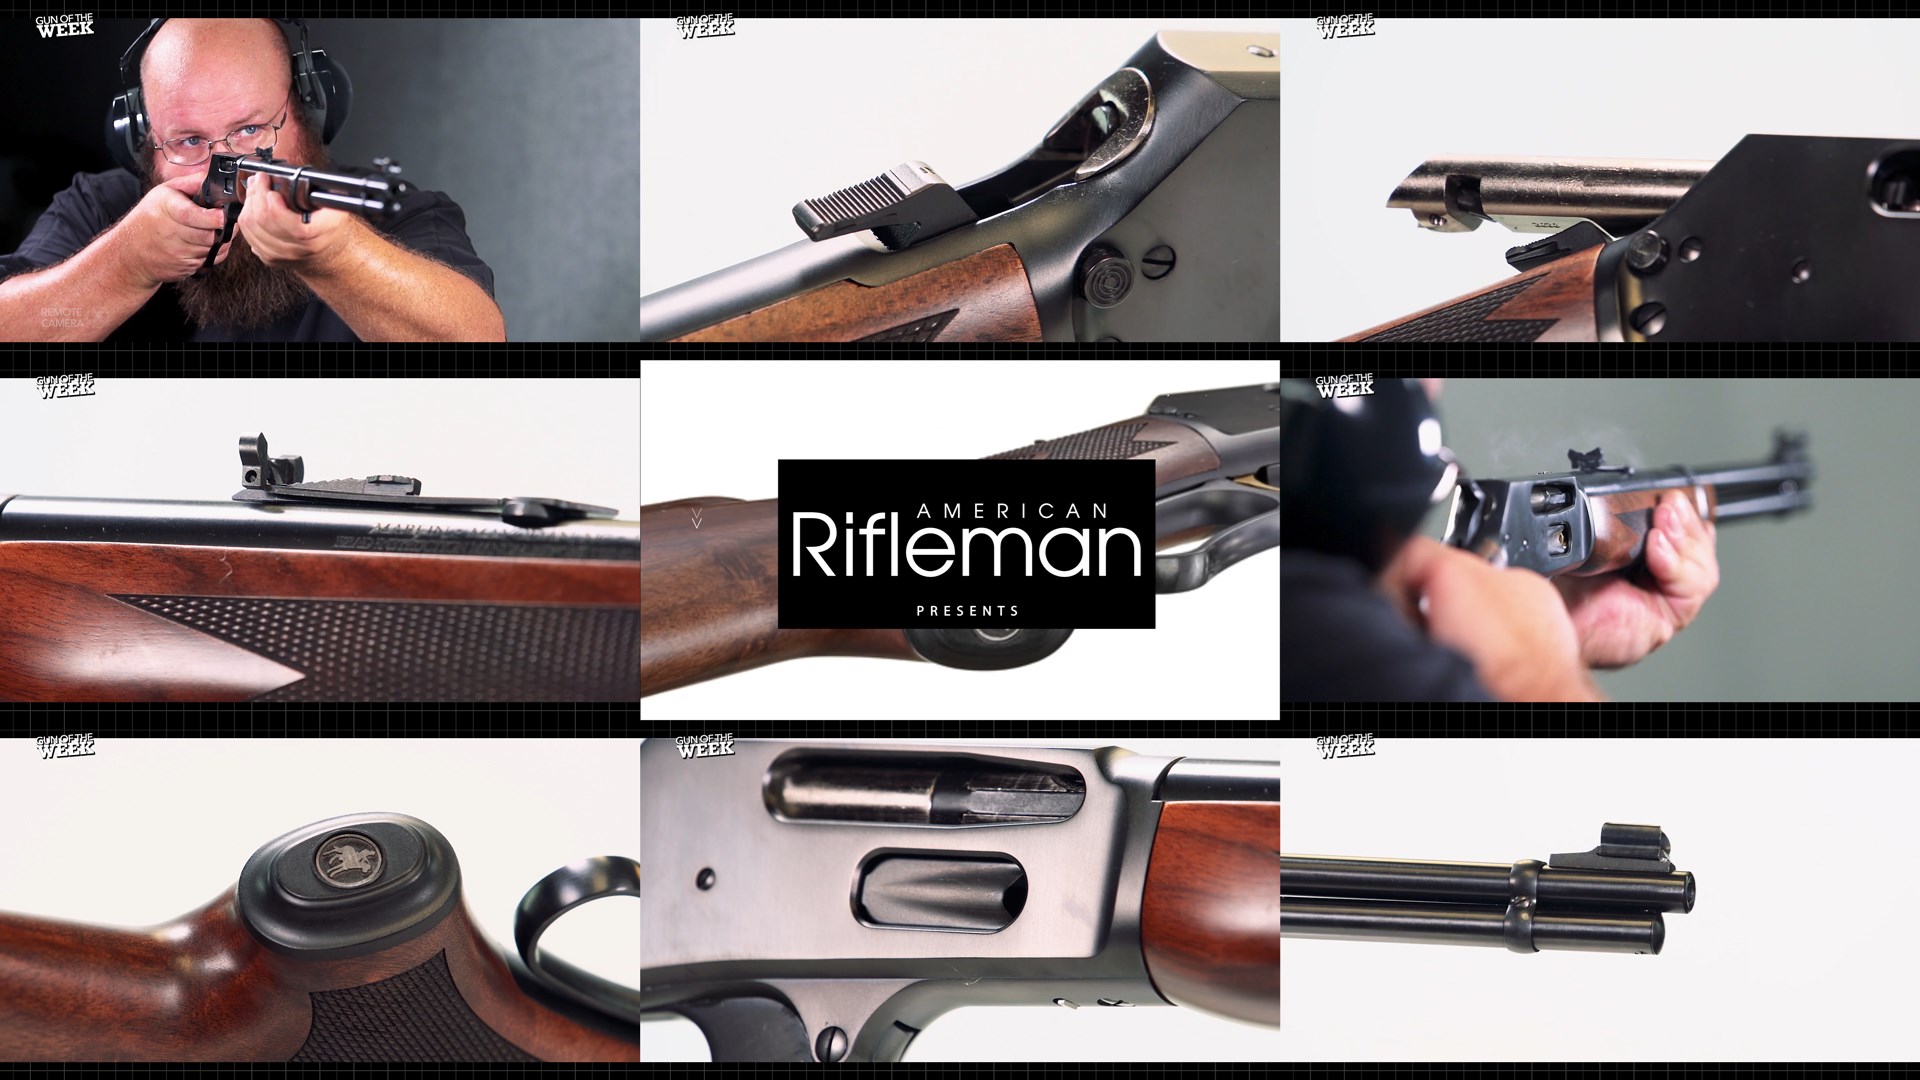 Nine images arrangement tiles showing American Rifleman staff shooting malin firearms model 336 classic lever-action rifle detail images inset